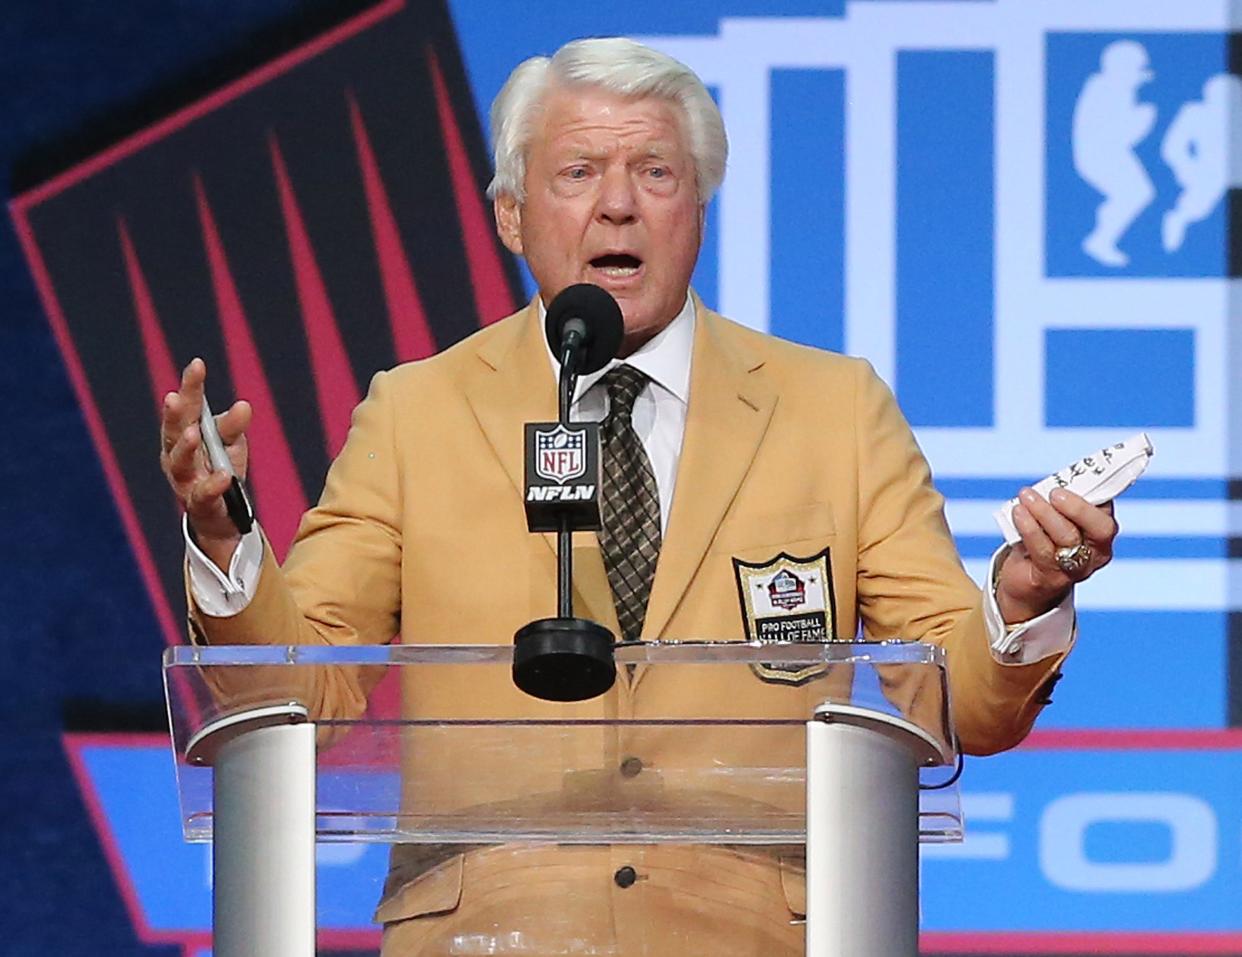 Jimmy Johnson was enshrined in the Pro Football Hall of Fame at Tom Benson Hall of Fame Stadium on Saturday, August 7, 2021. Johnson was presented by Cowboys quarterback Troy Aikman. 